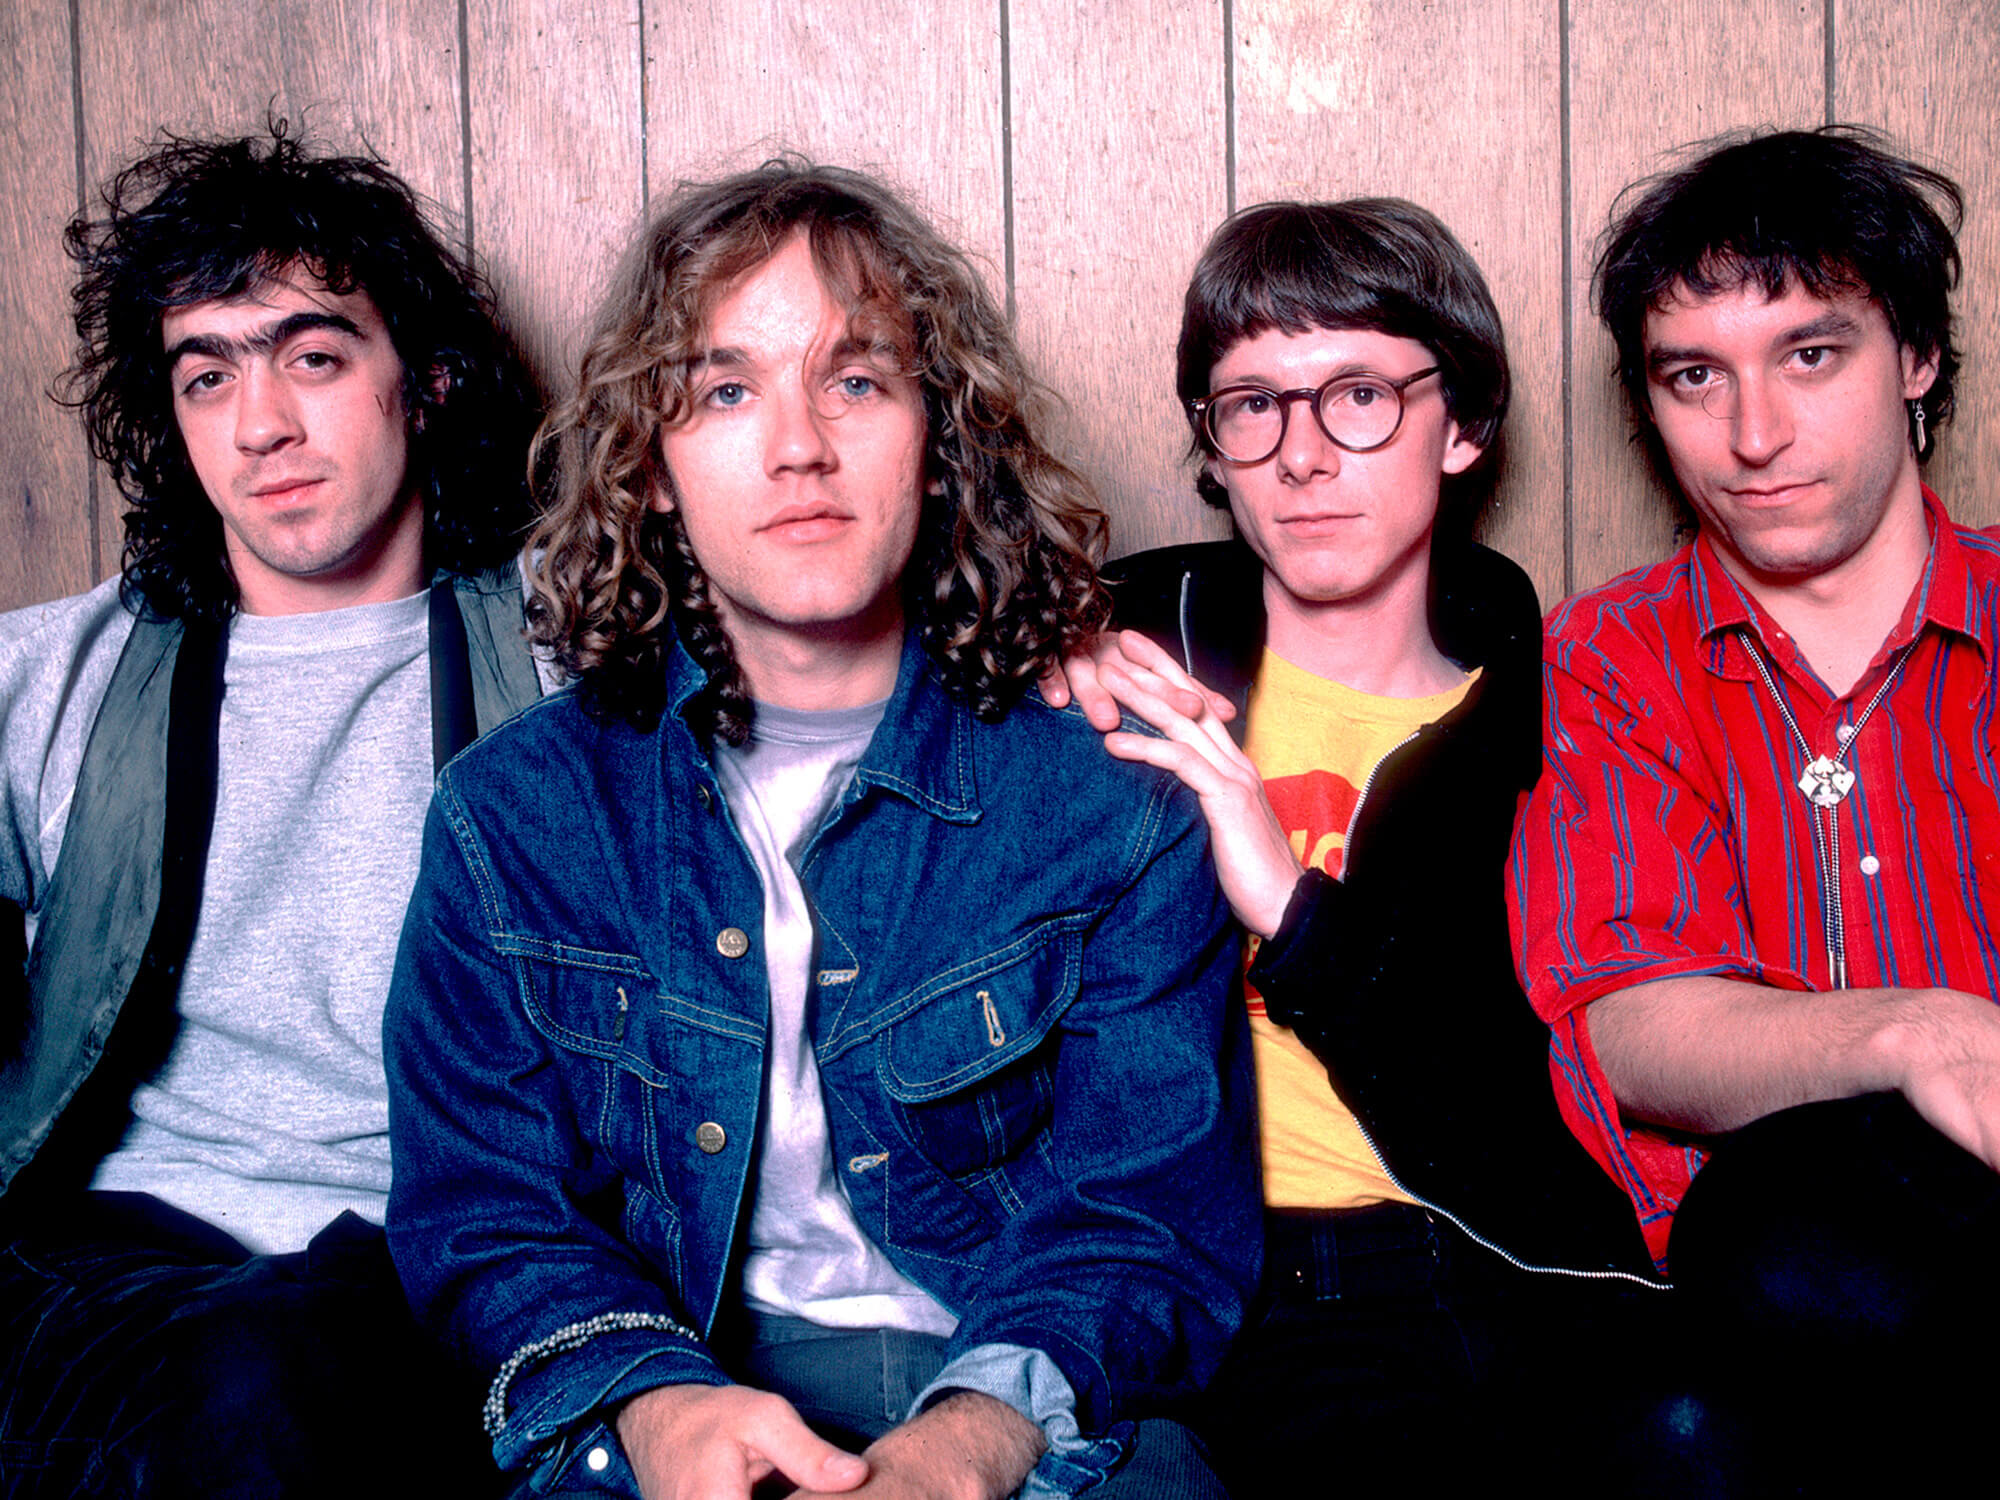 R.E.M. in 1984 by Paul Natkin/Getty Images